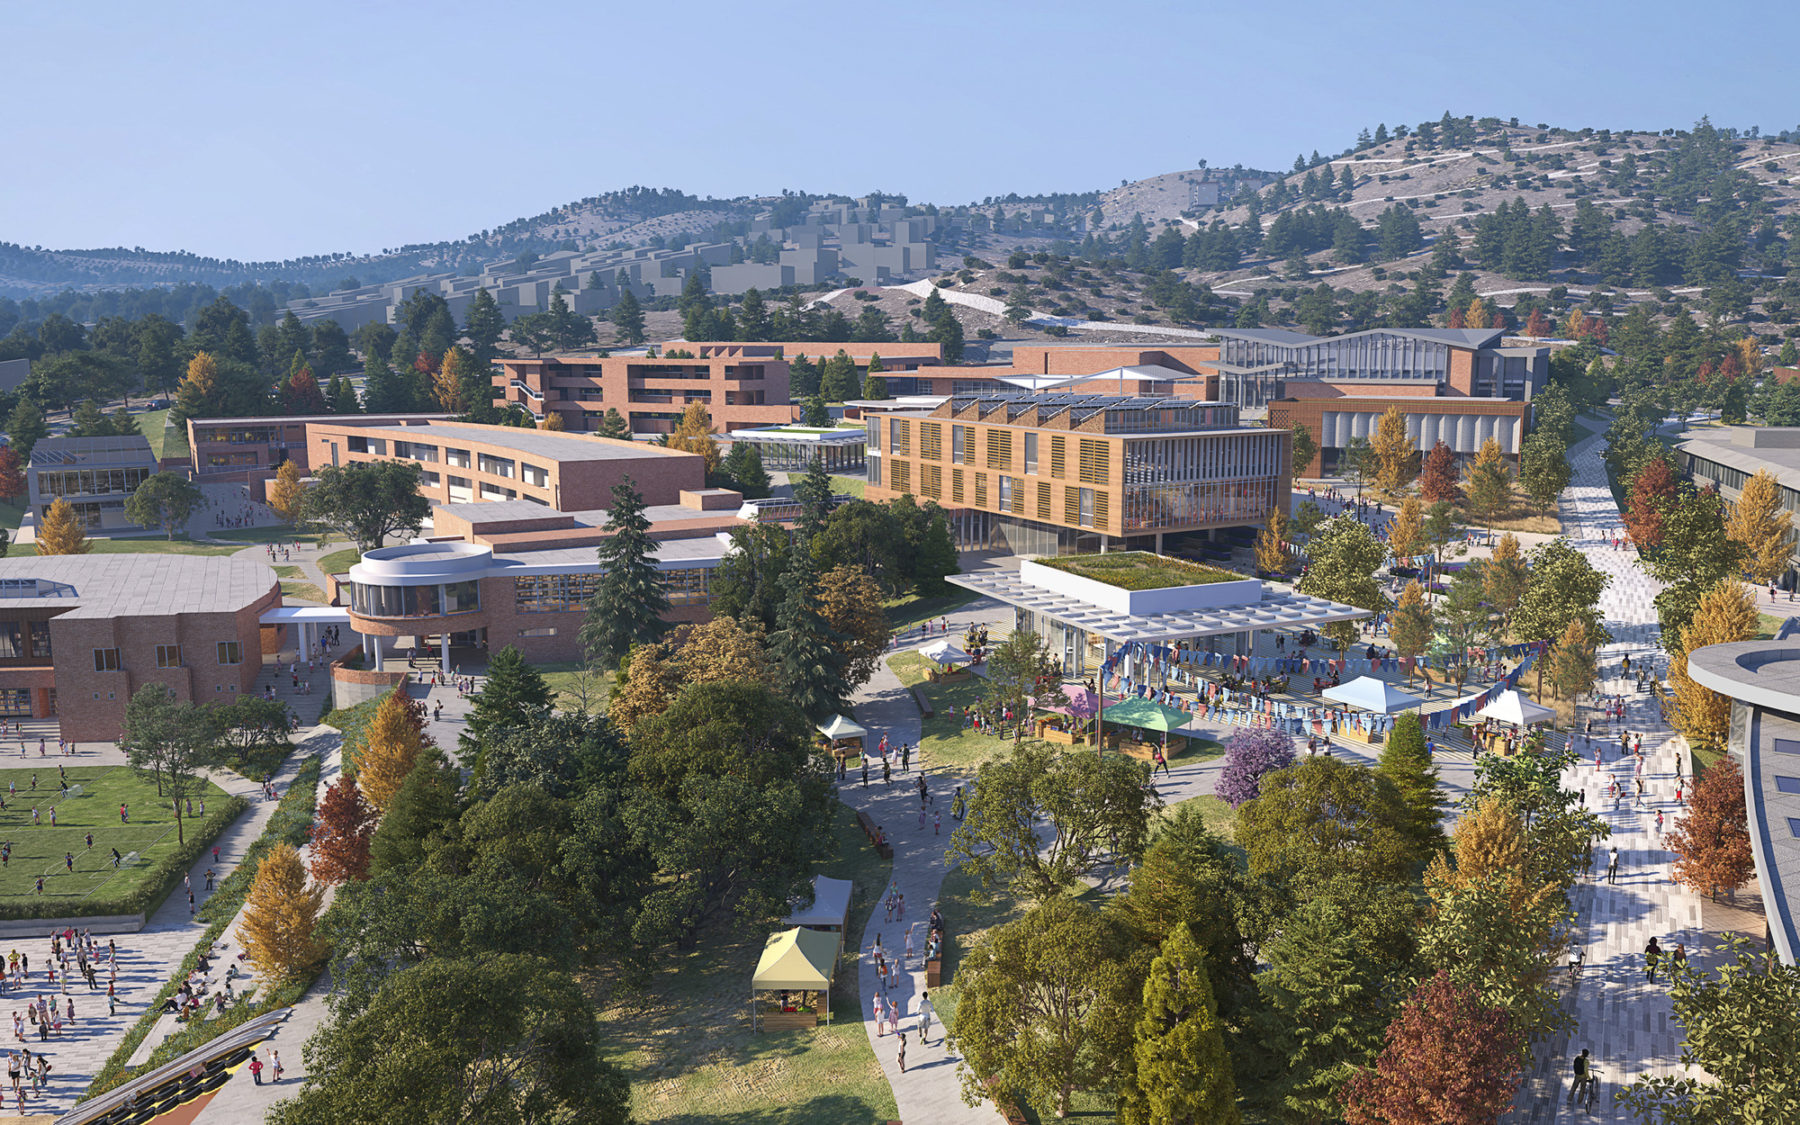 aerial rendering of campus vision showing the campus in the foreground and mountains beyond